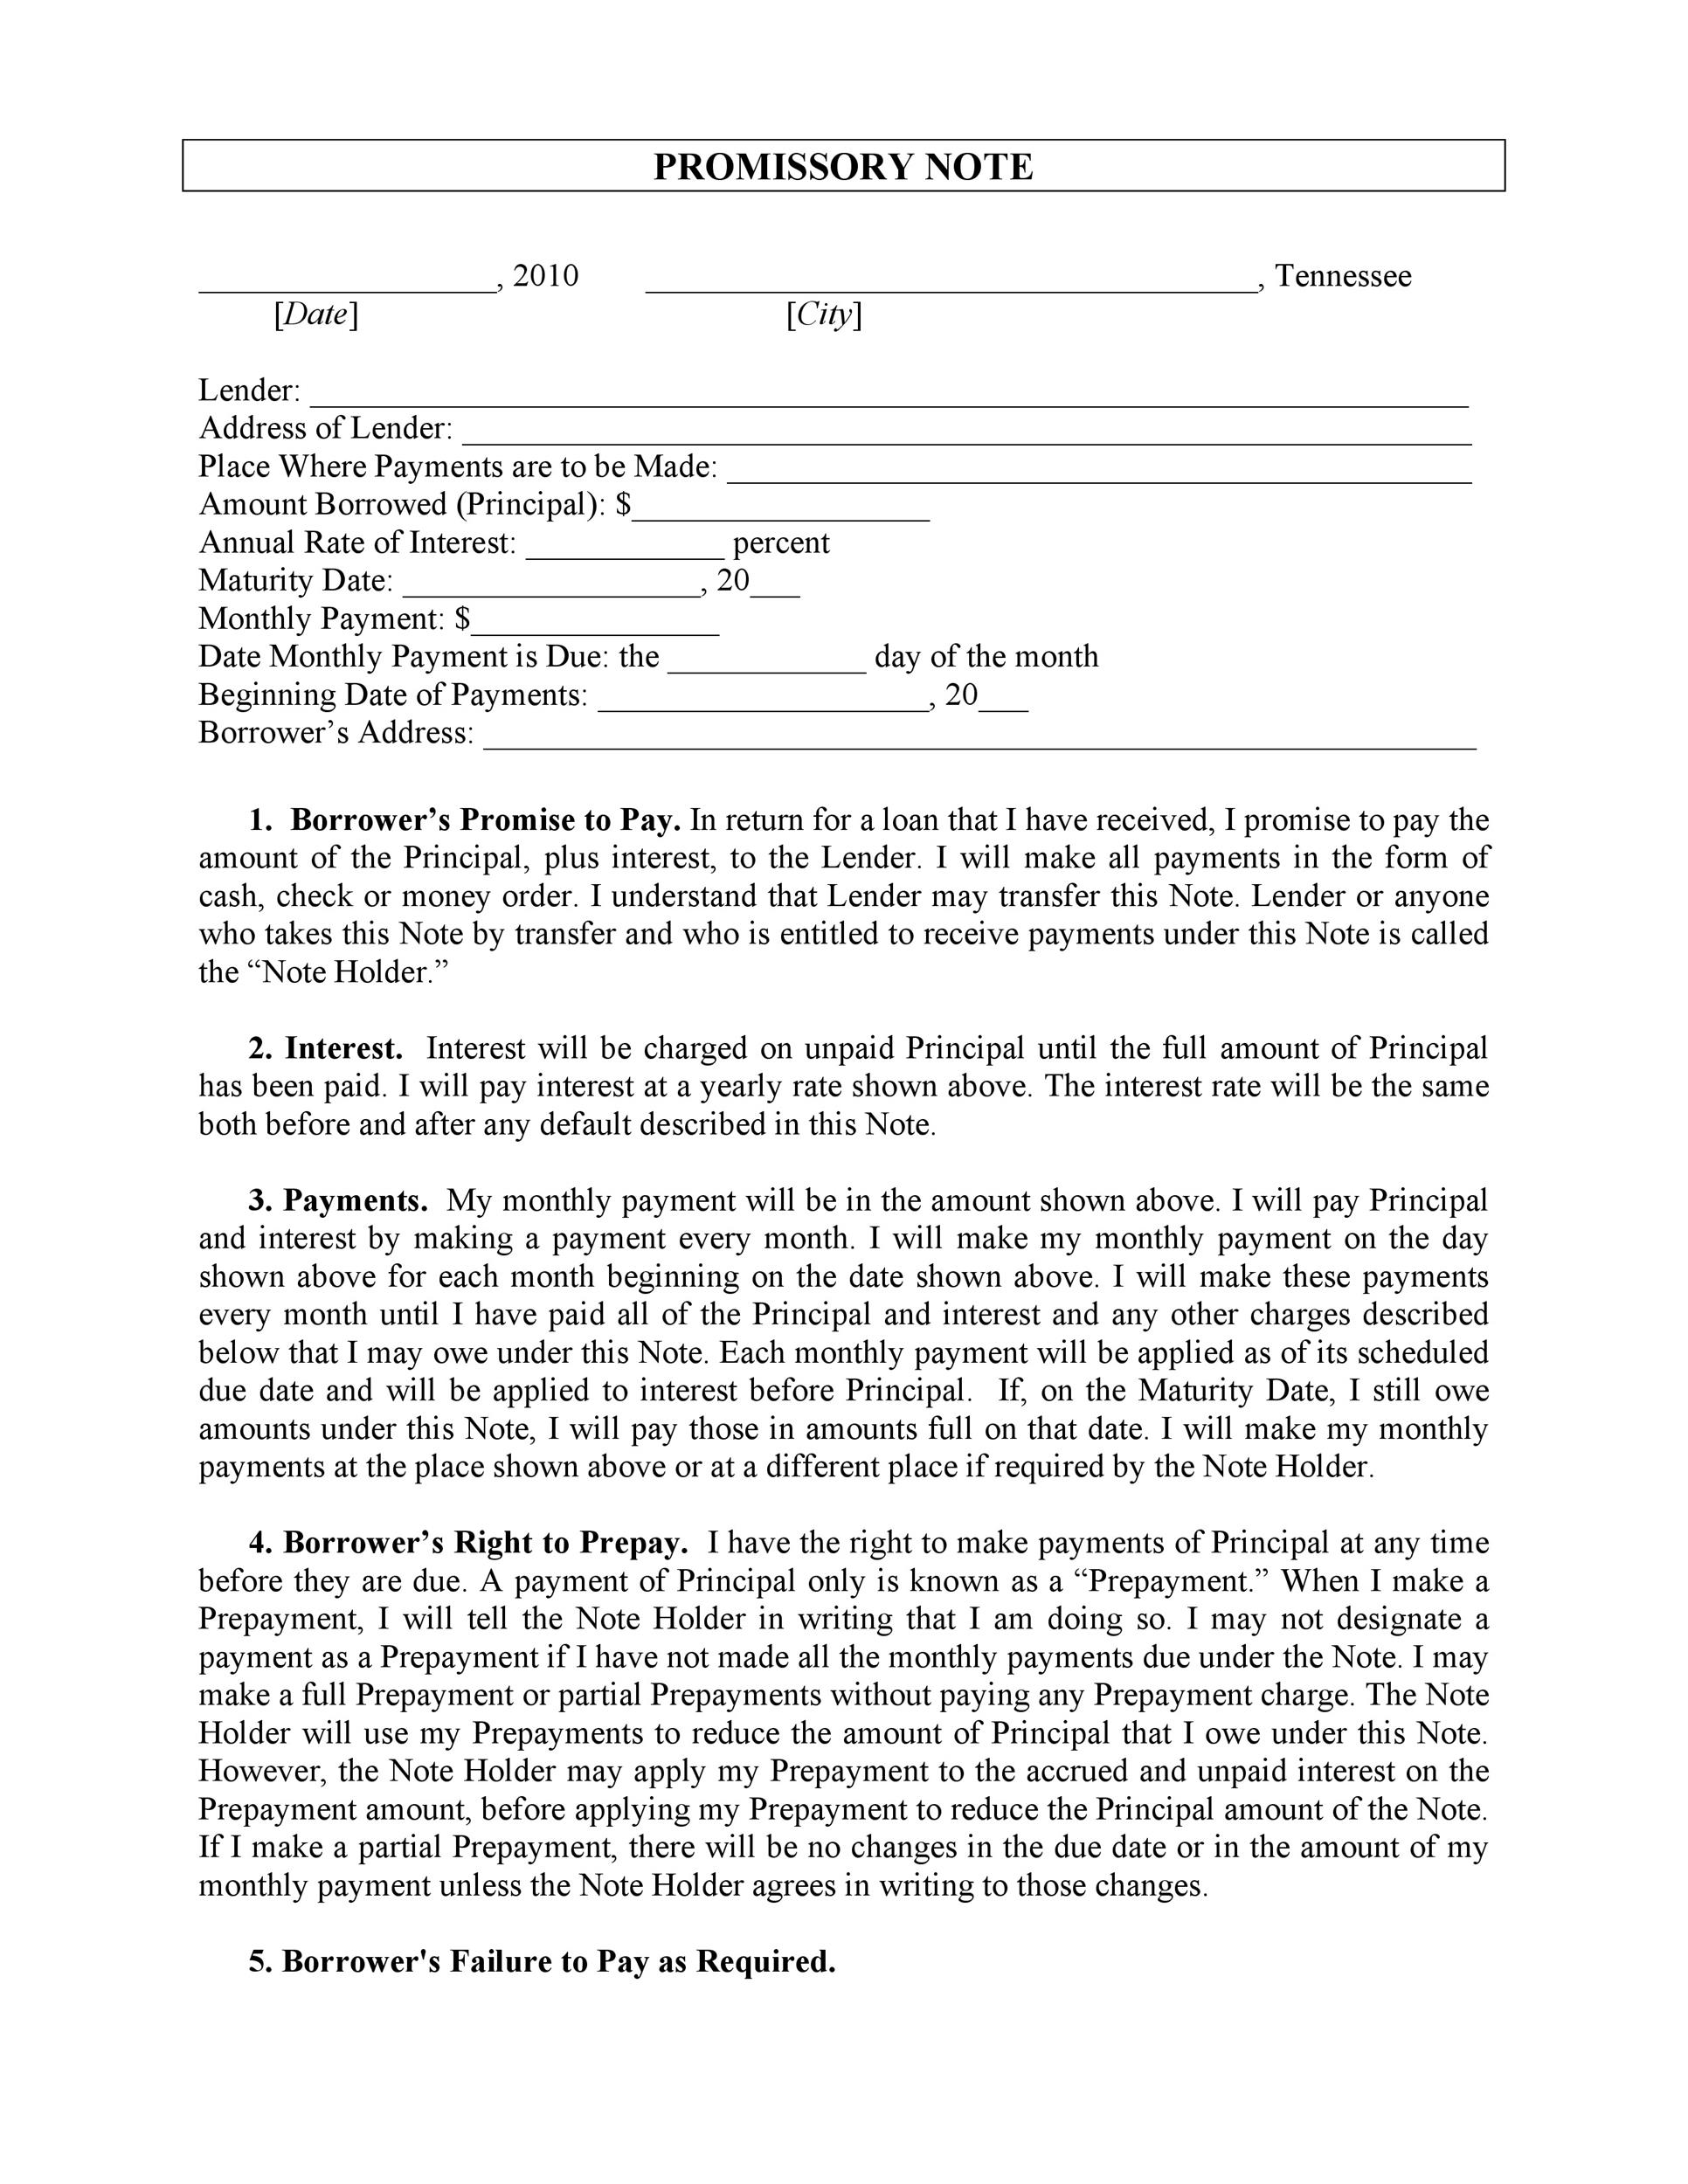 promissory note template 27